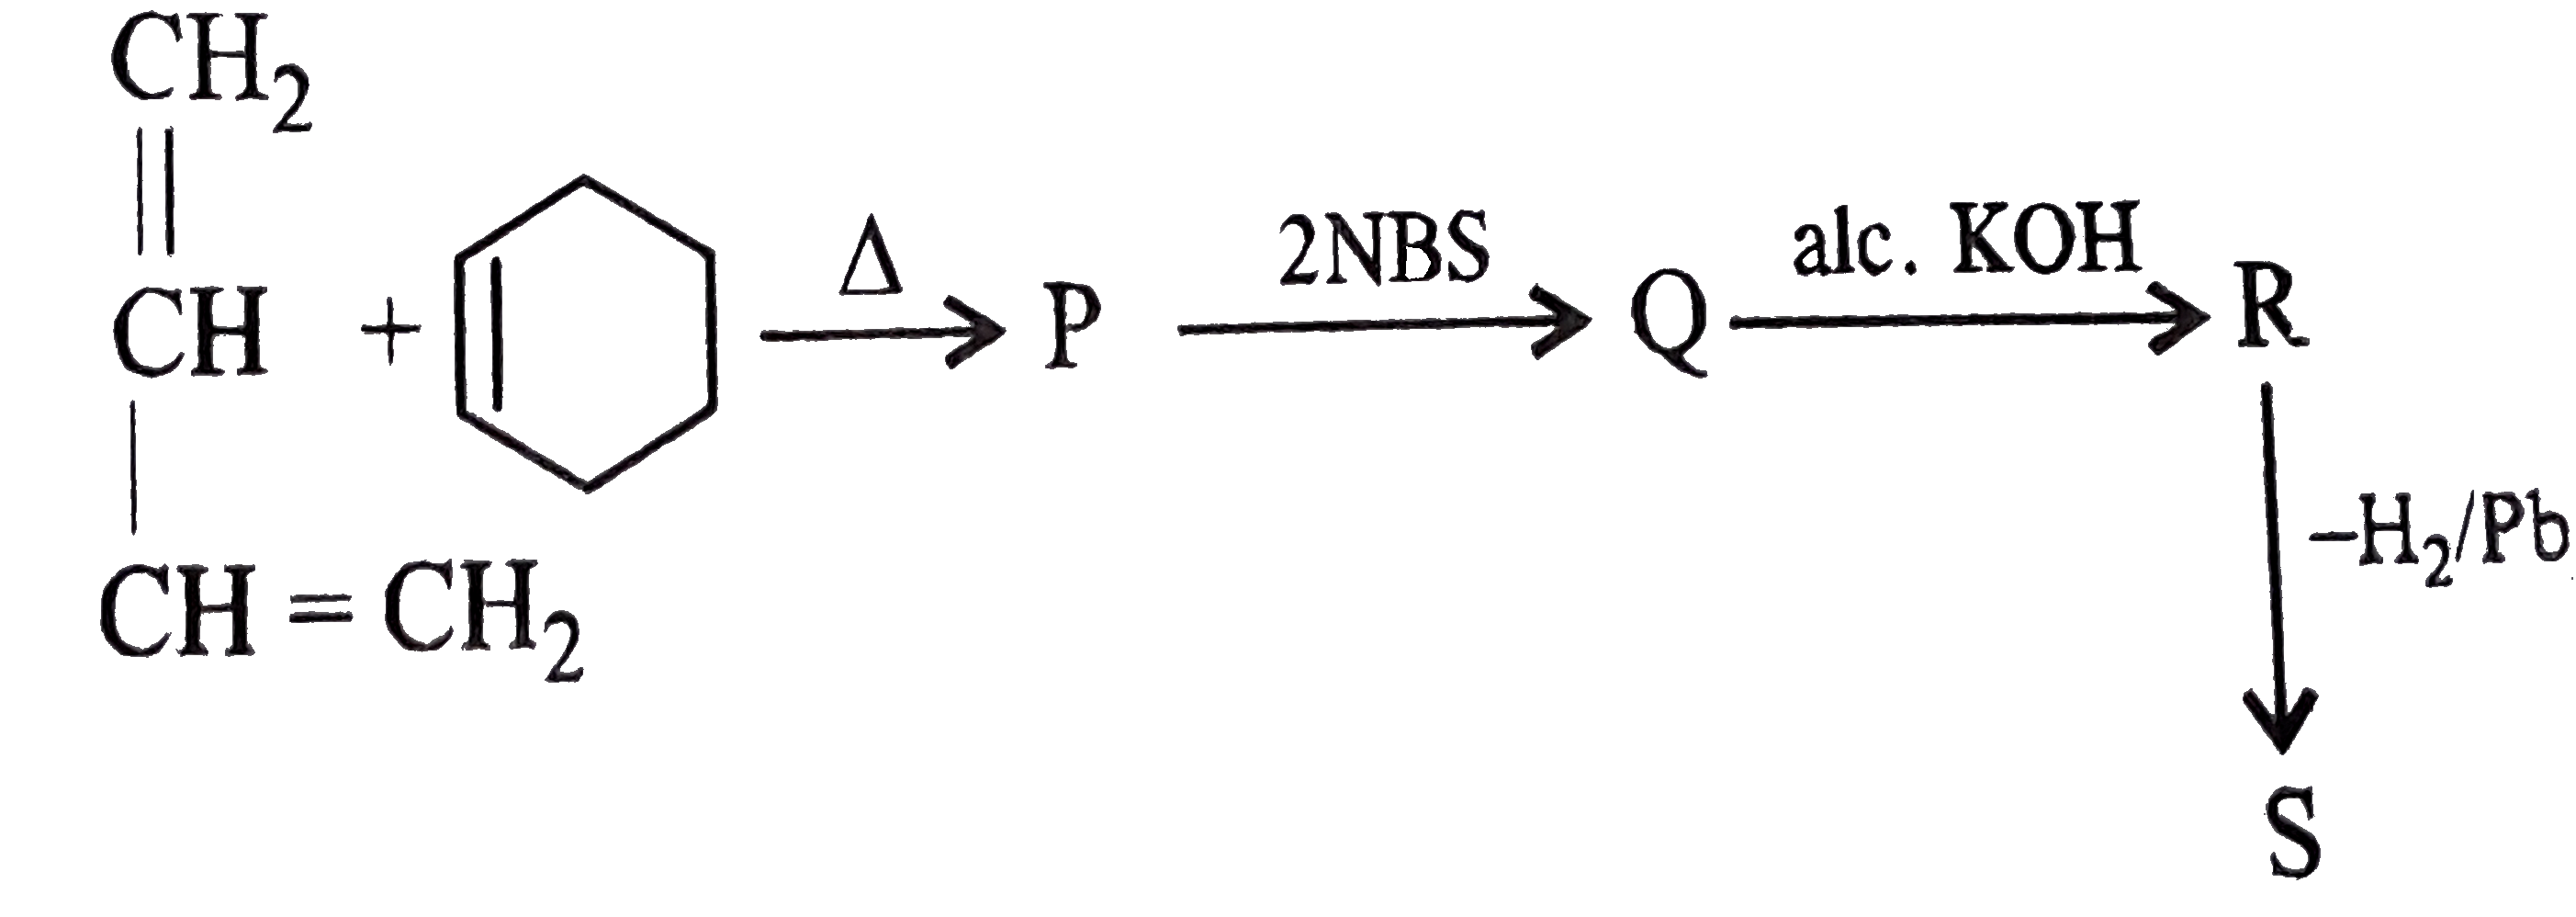 The final product (S) formed in the following reaction sequence is